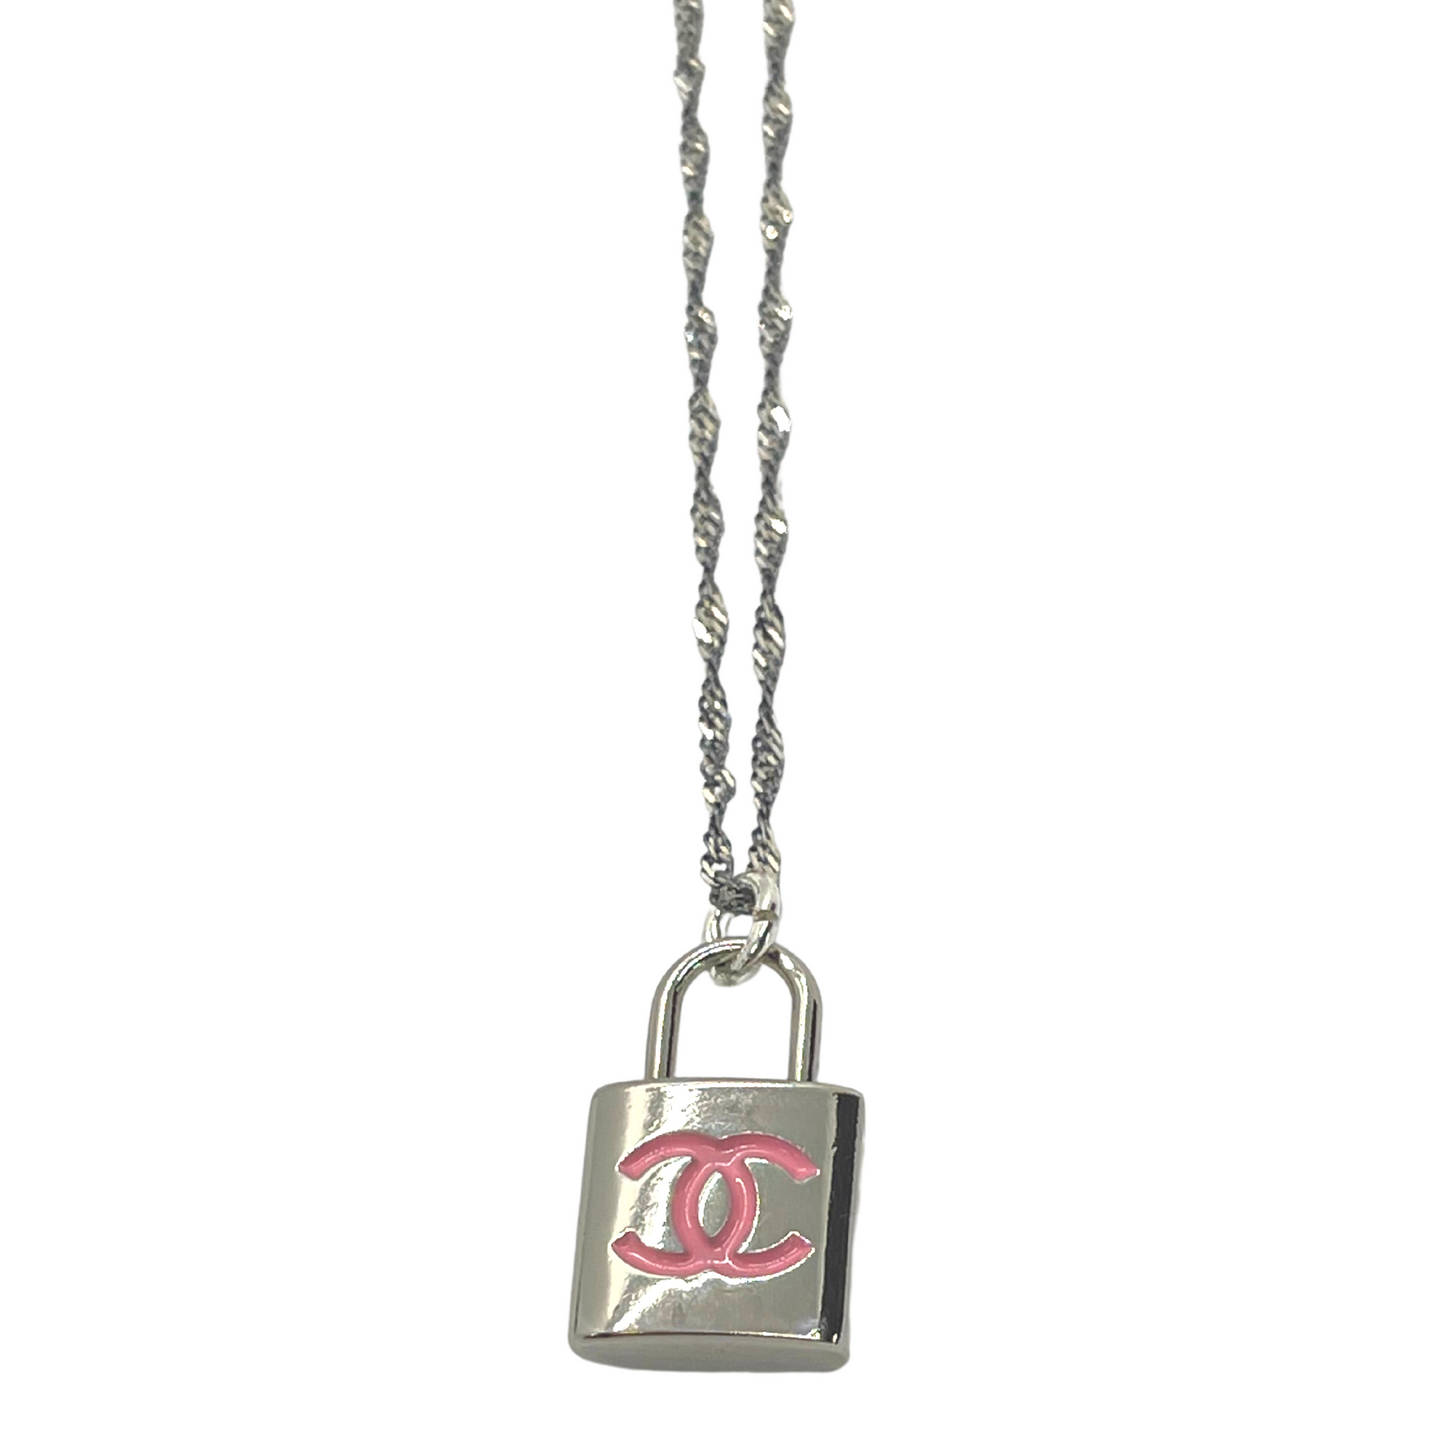 Authentic Chanel Pink Lock Pendant | Reworked Silver 20" Necklace